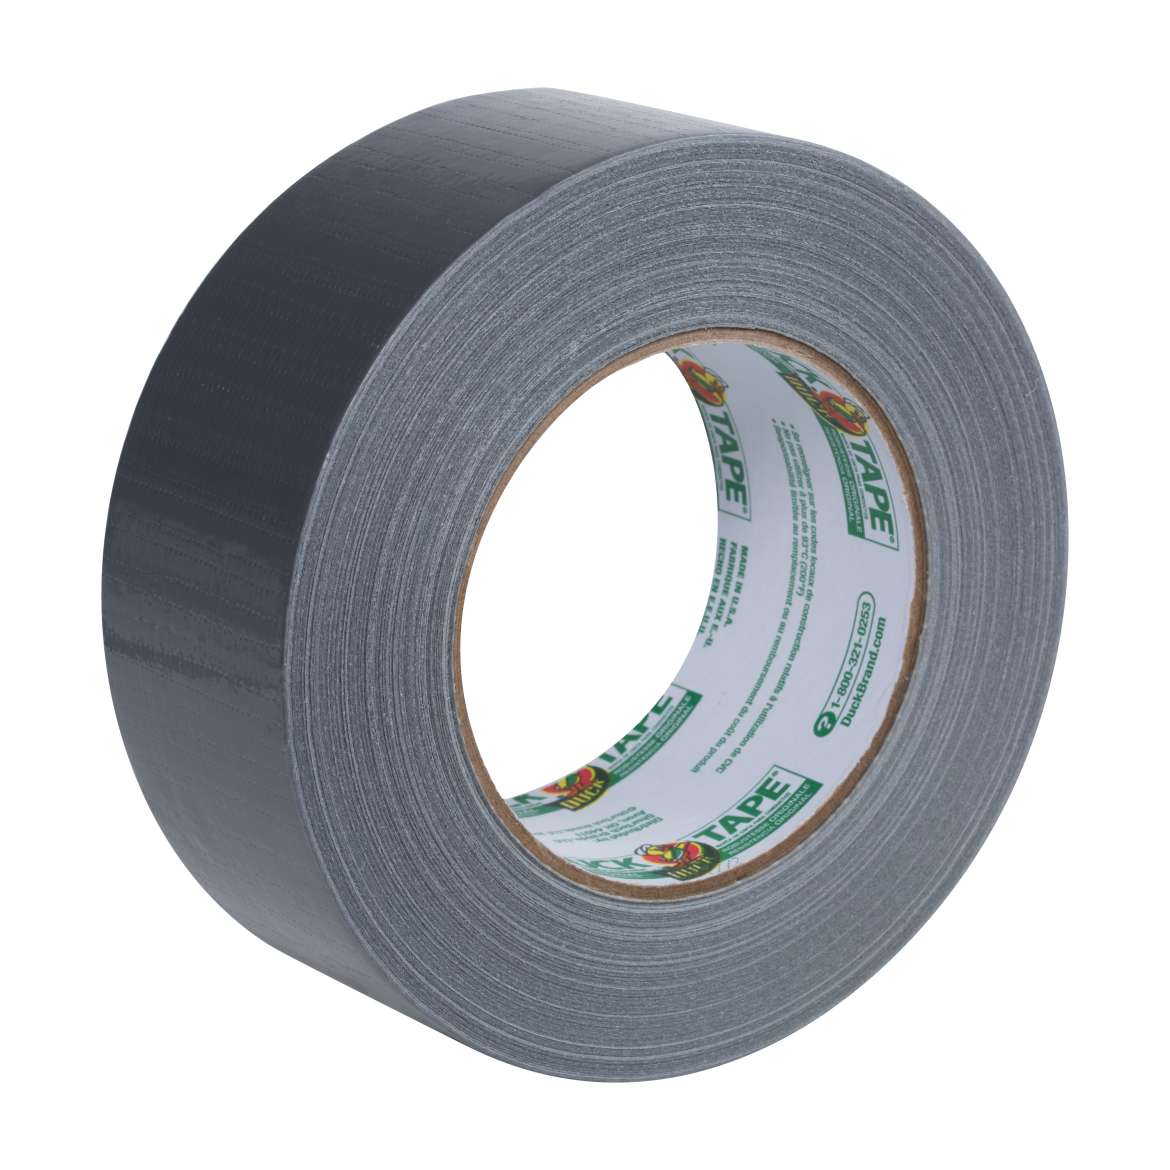 Duck Brand Original Strength Duct Tape, 1.88 in. x 55 yds., Silver - image 3 of 9